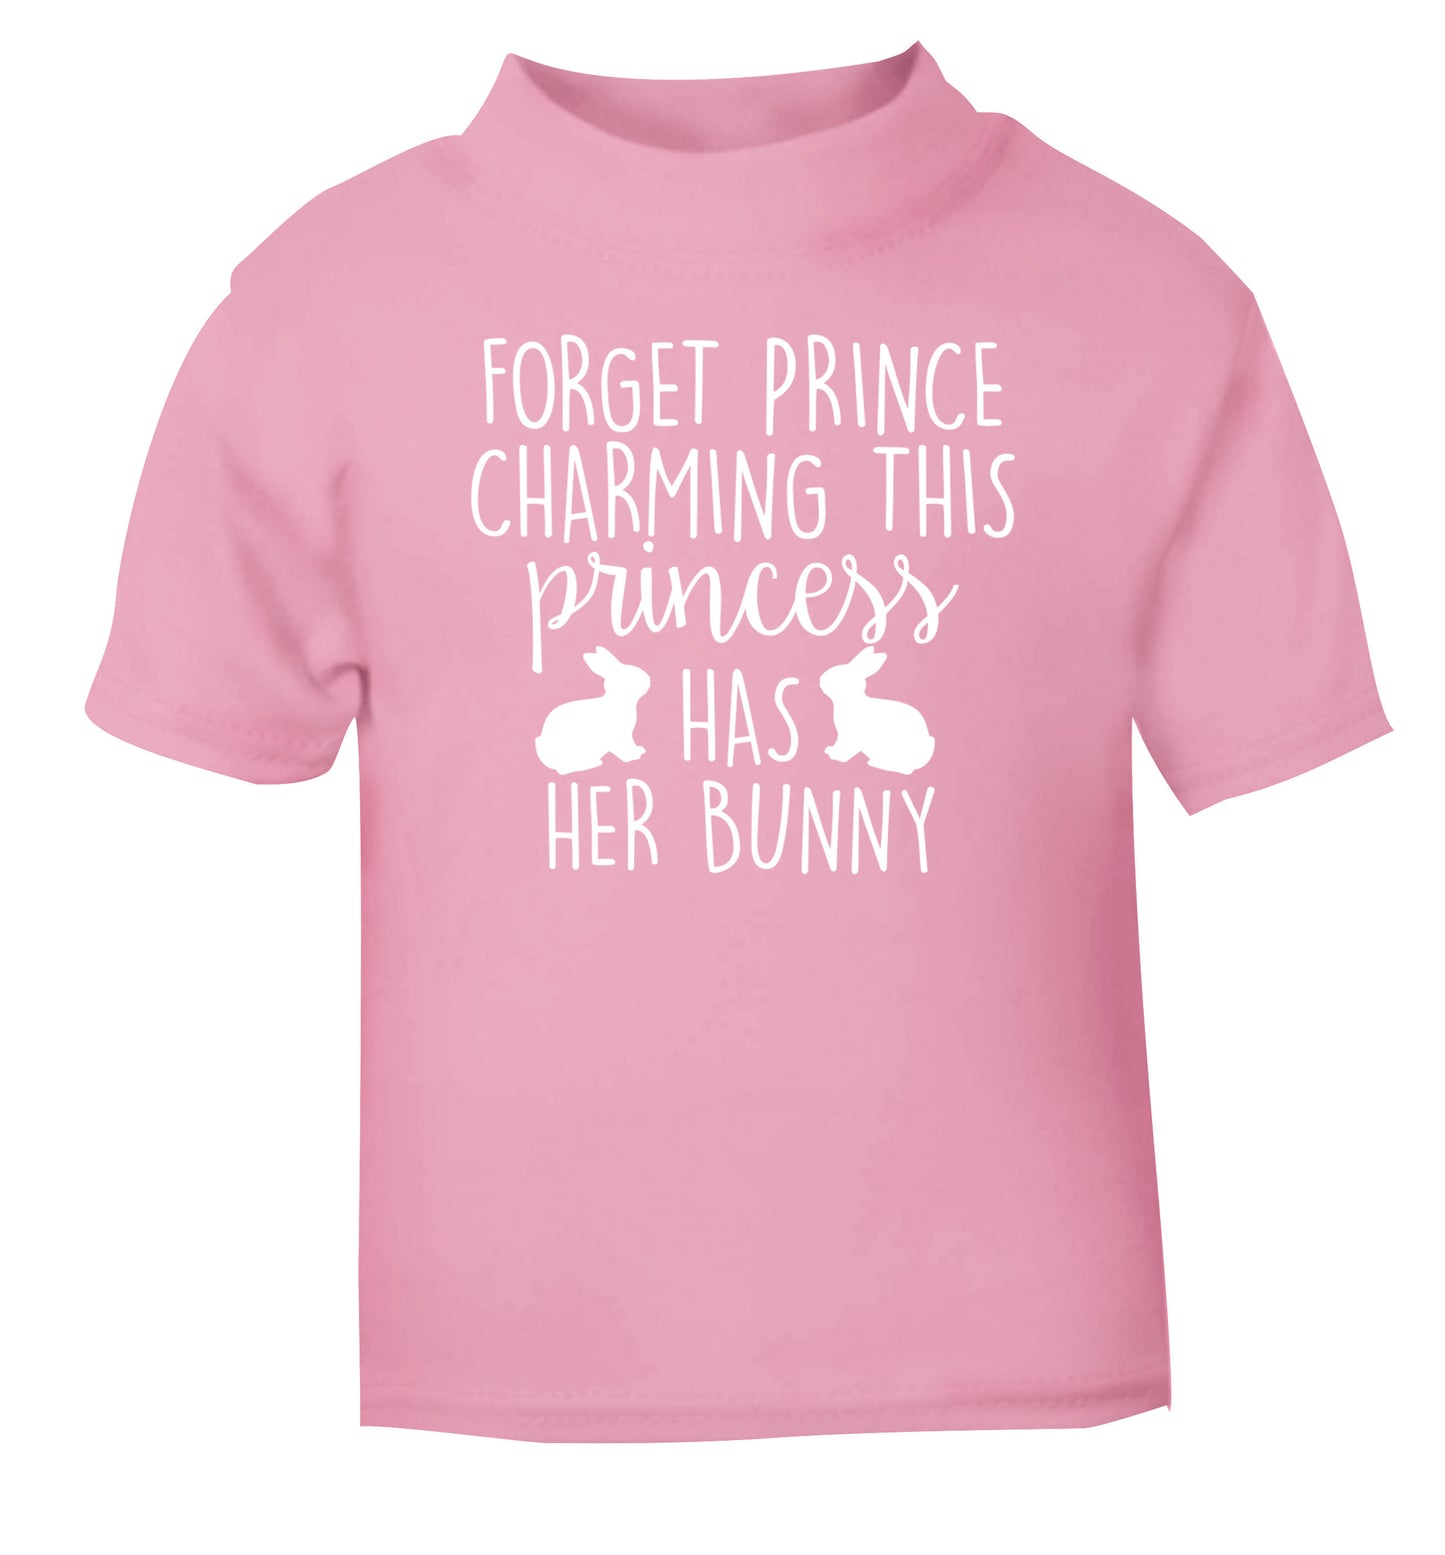 Forget prince charming this princess has her bunny light pink Baby Toddler Tshirt 2 Years